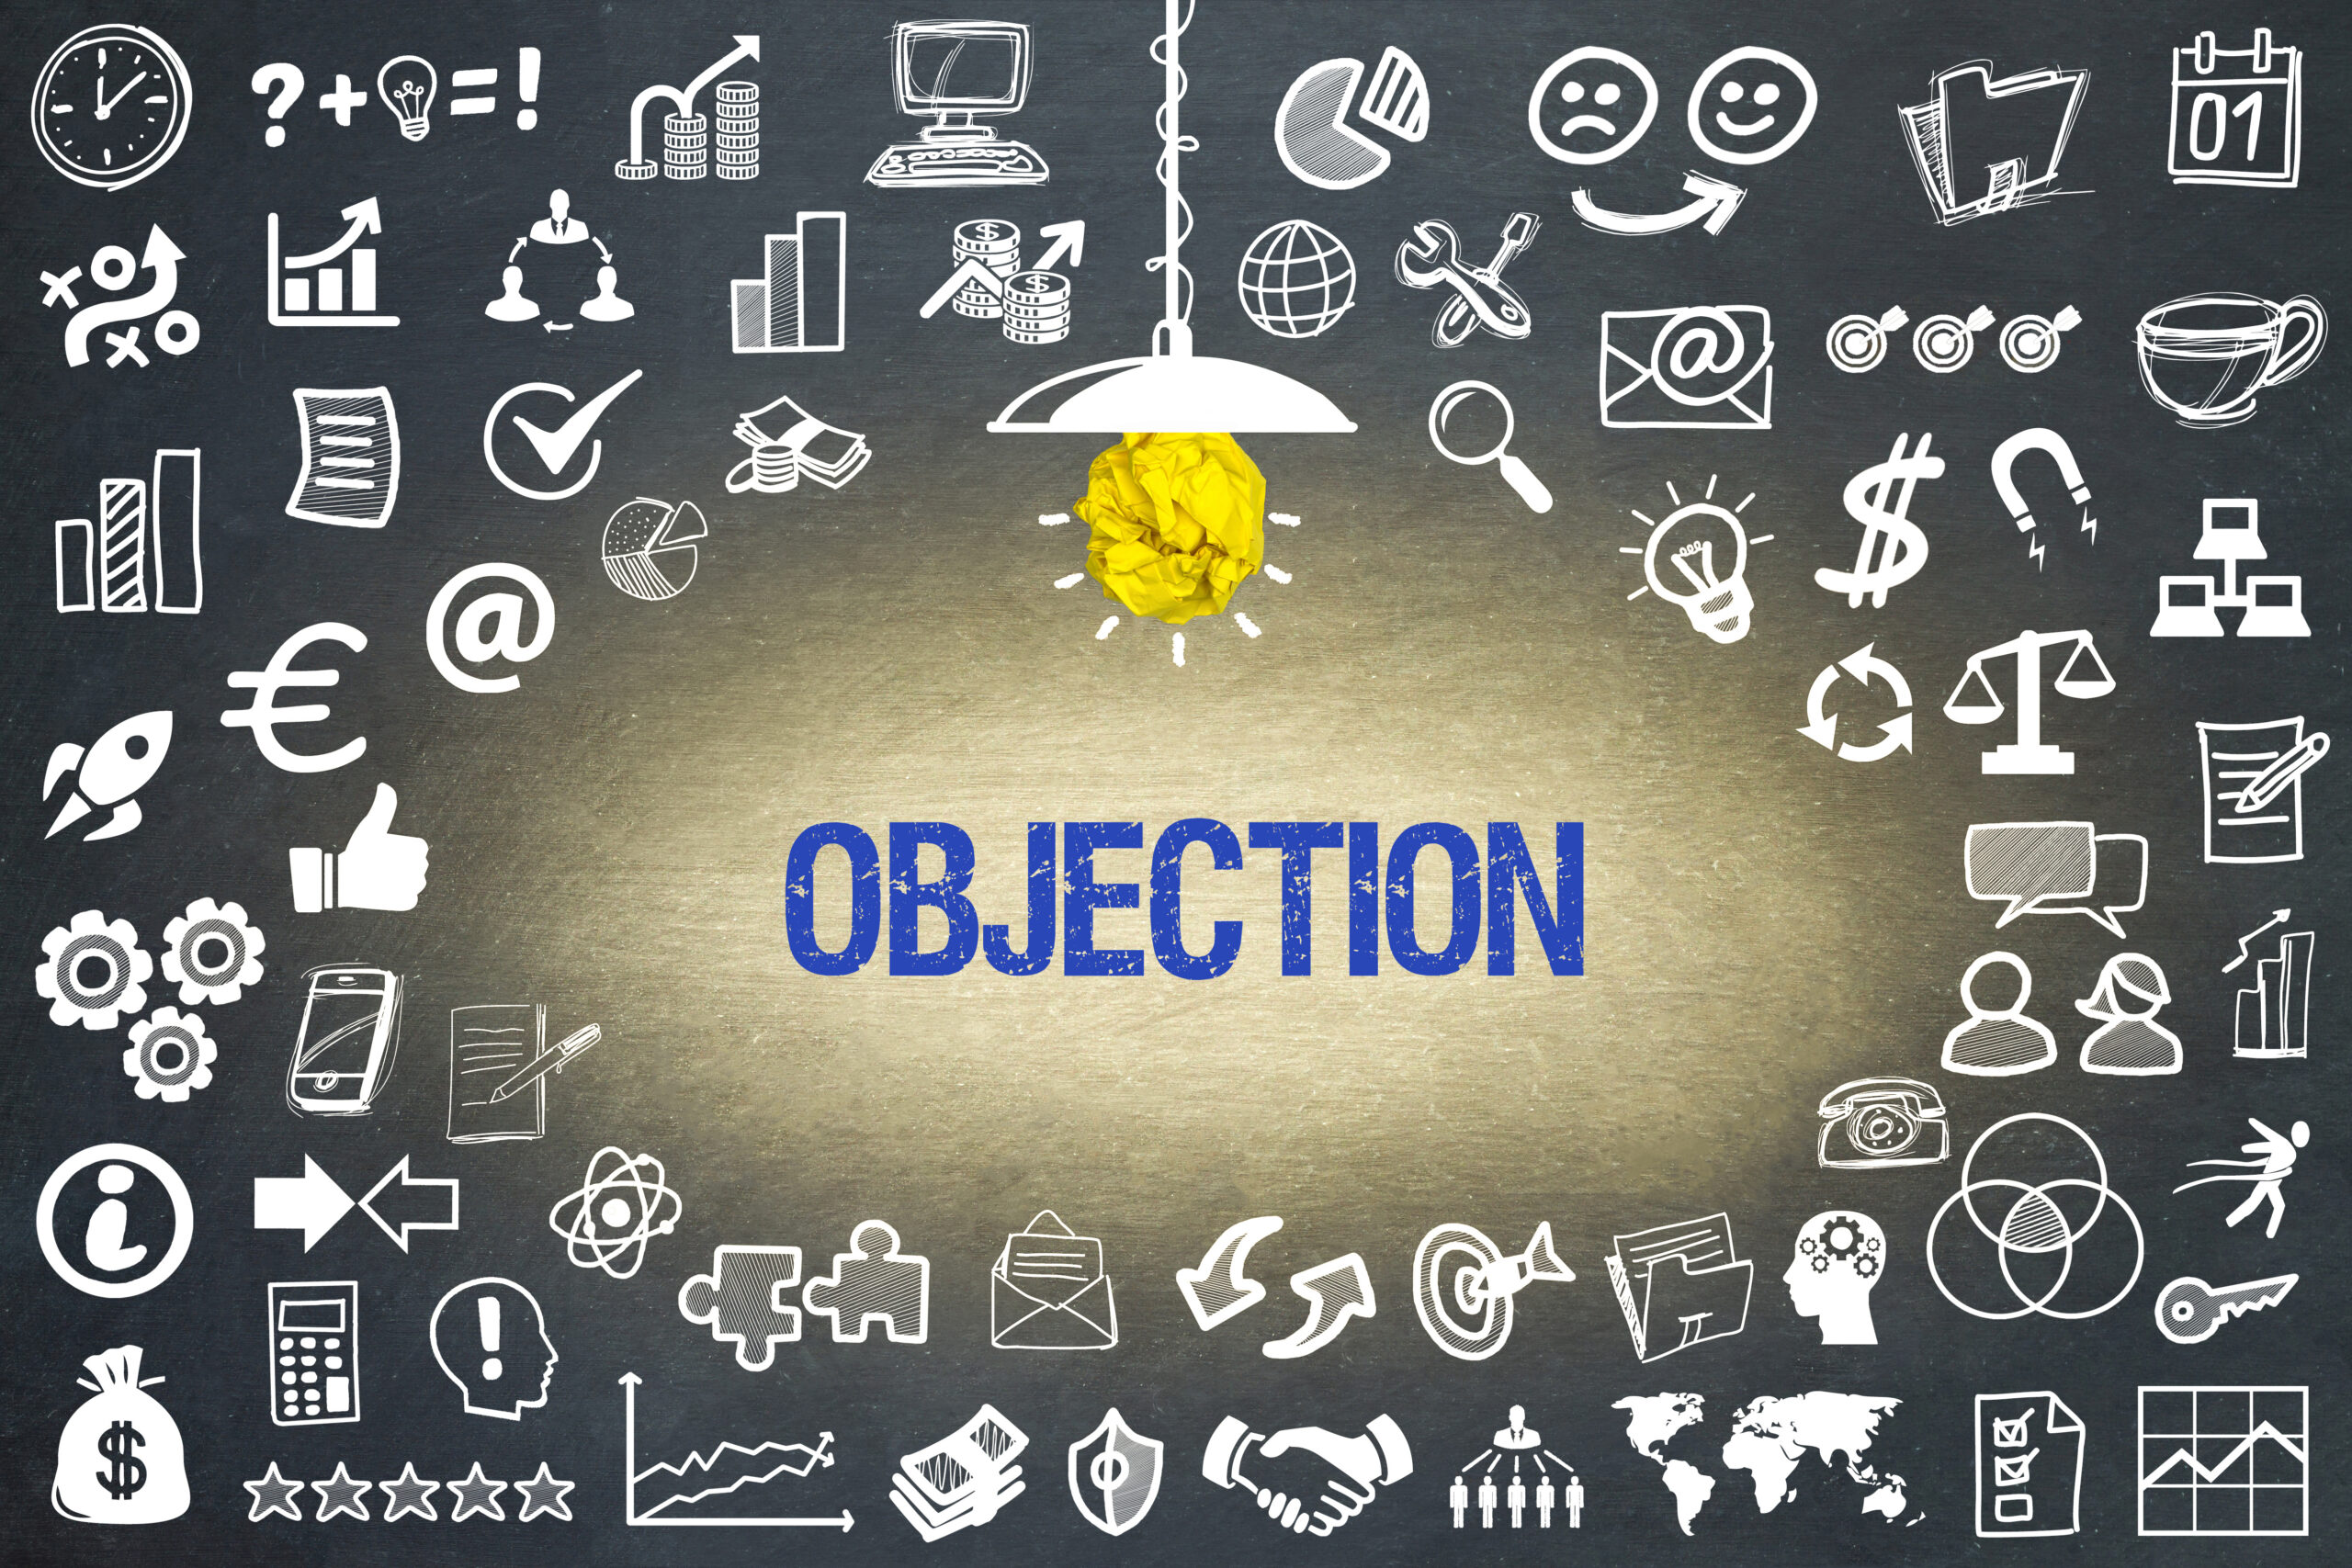 Objection in English